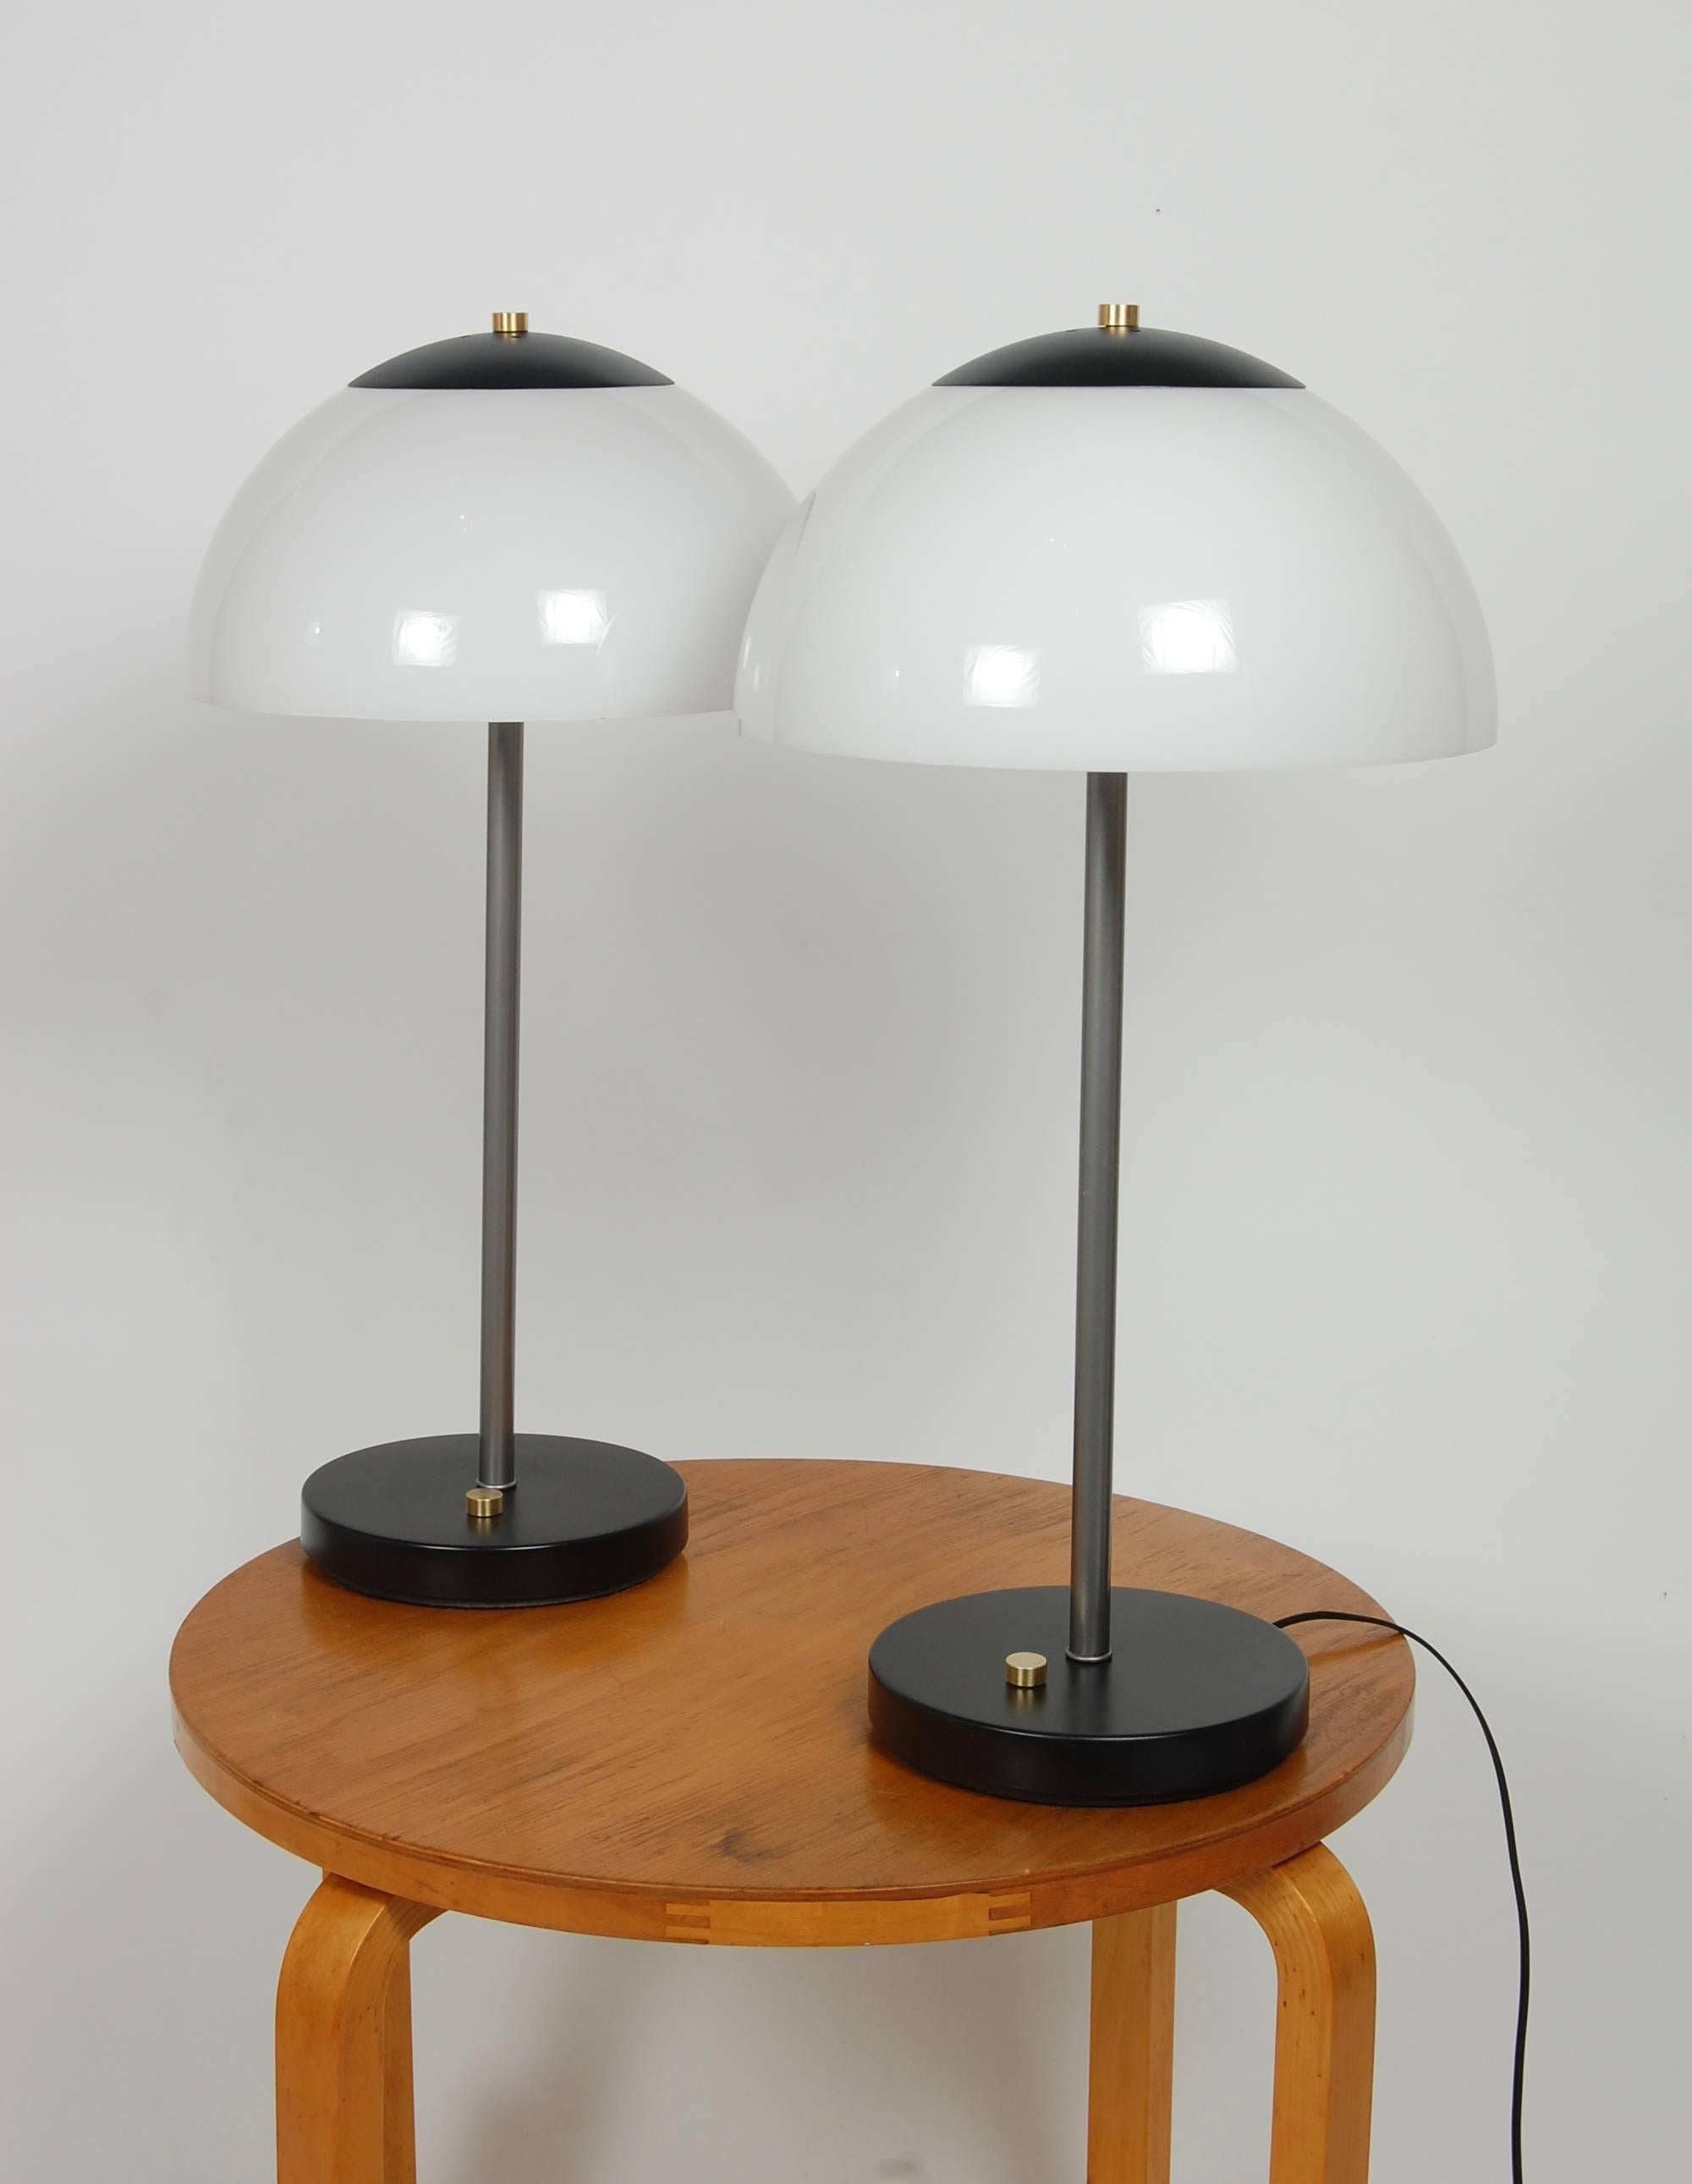 Pair of table lamps by Koch & Lowy, half glass dome shade that tilts to adjust the light. Two light sockets per lamp. Brass accents on the top of shade and switch on base.